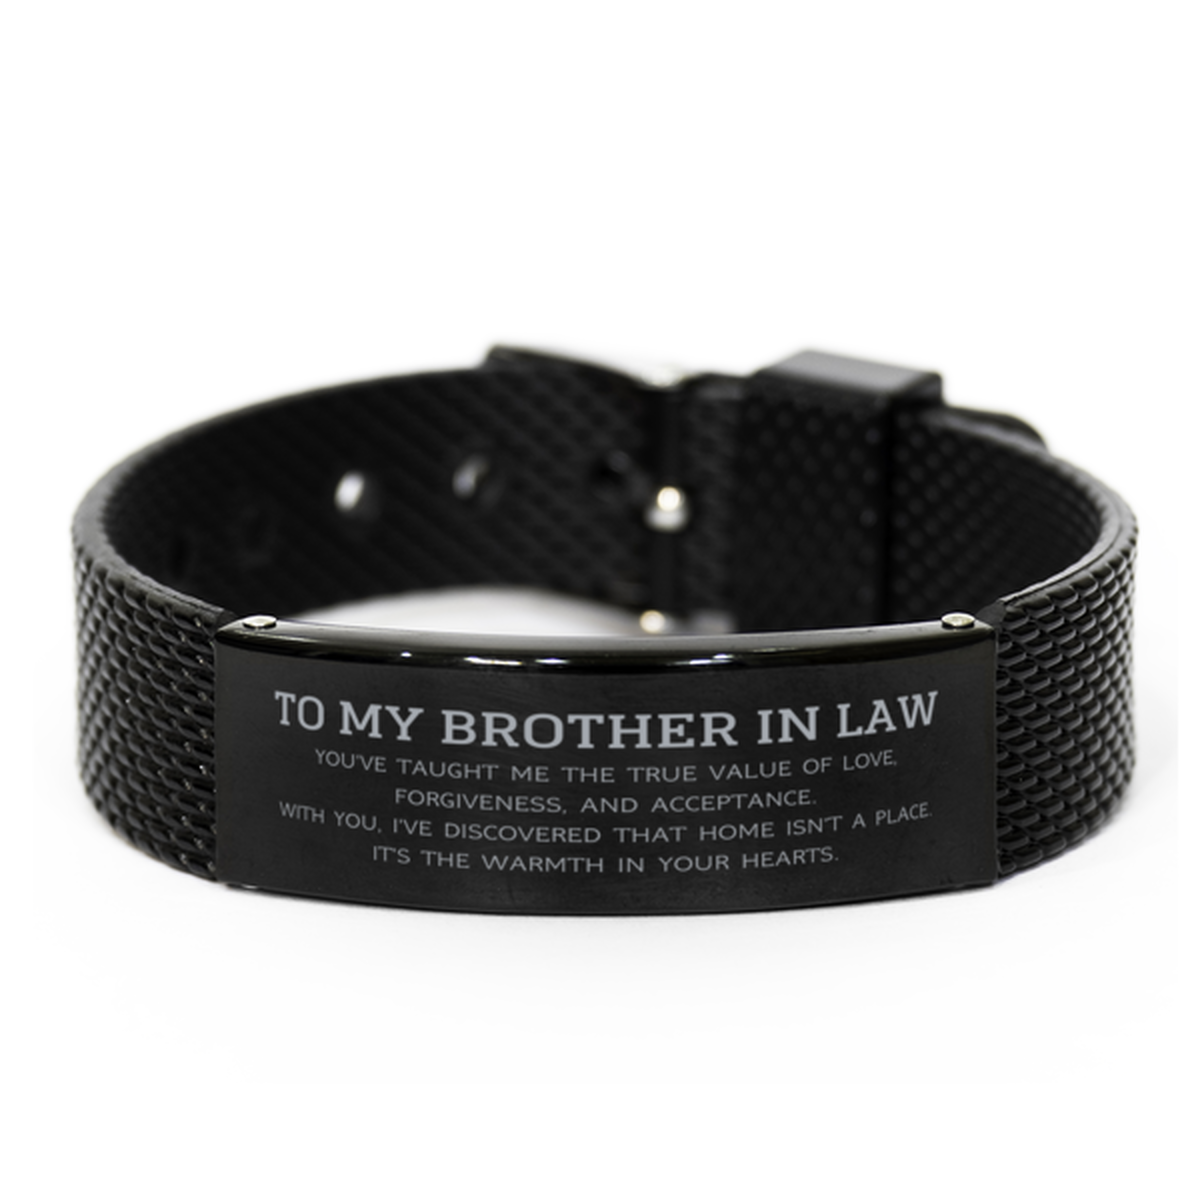 To My Brother In Law Gifts, You've taught me the true value of love, Thank You Gifts For Brother In Law, Birthday Black Shark Mesh Bracelet For Brother In Law